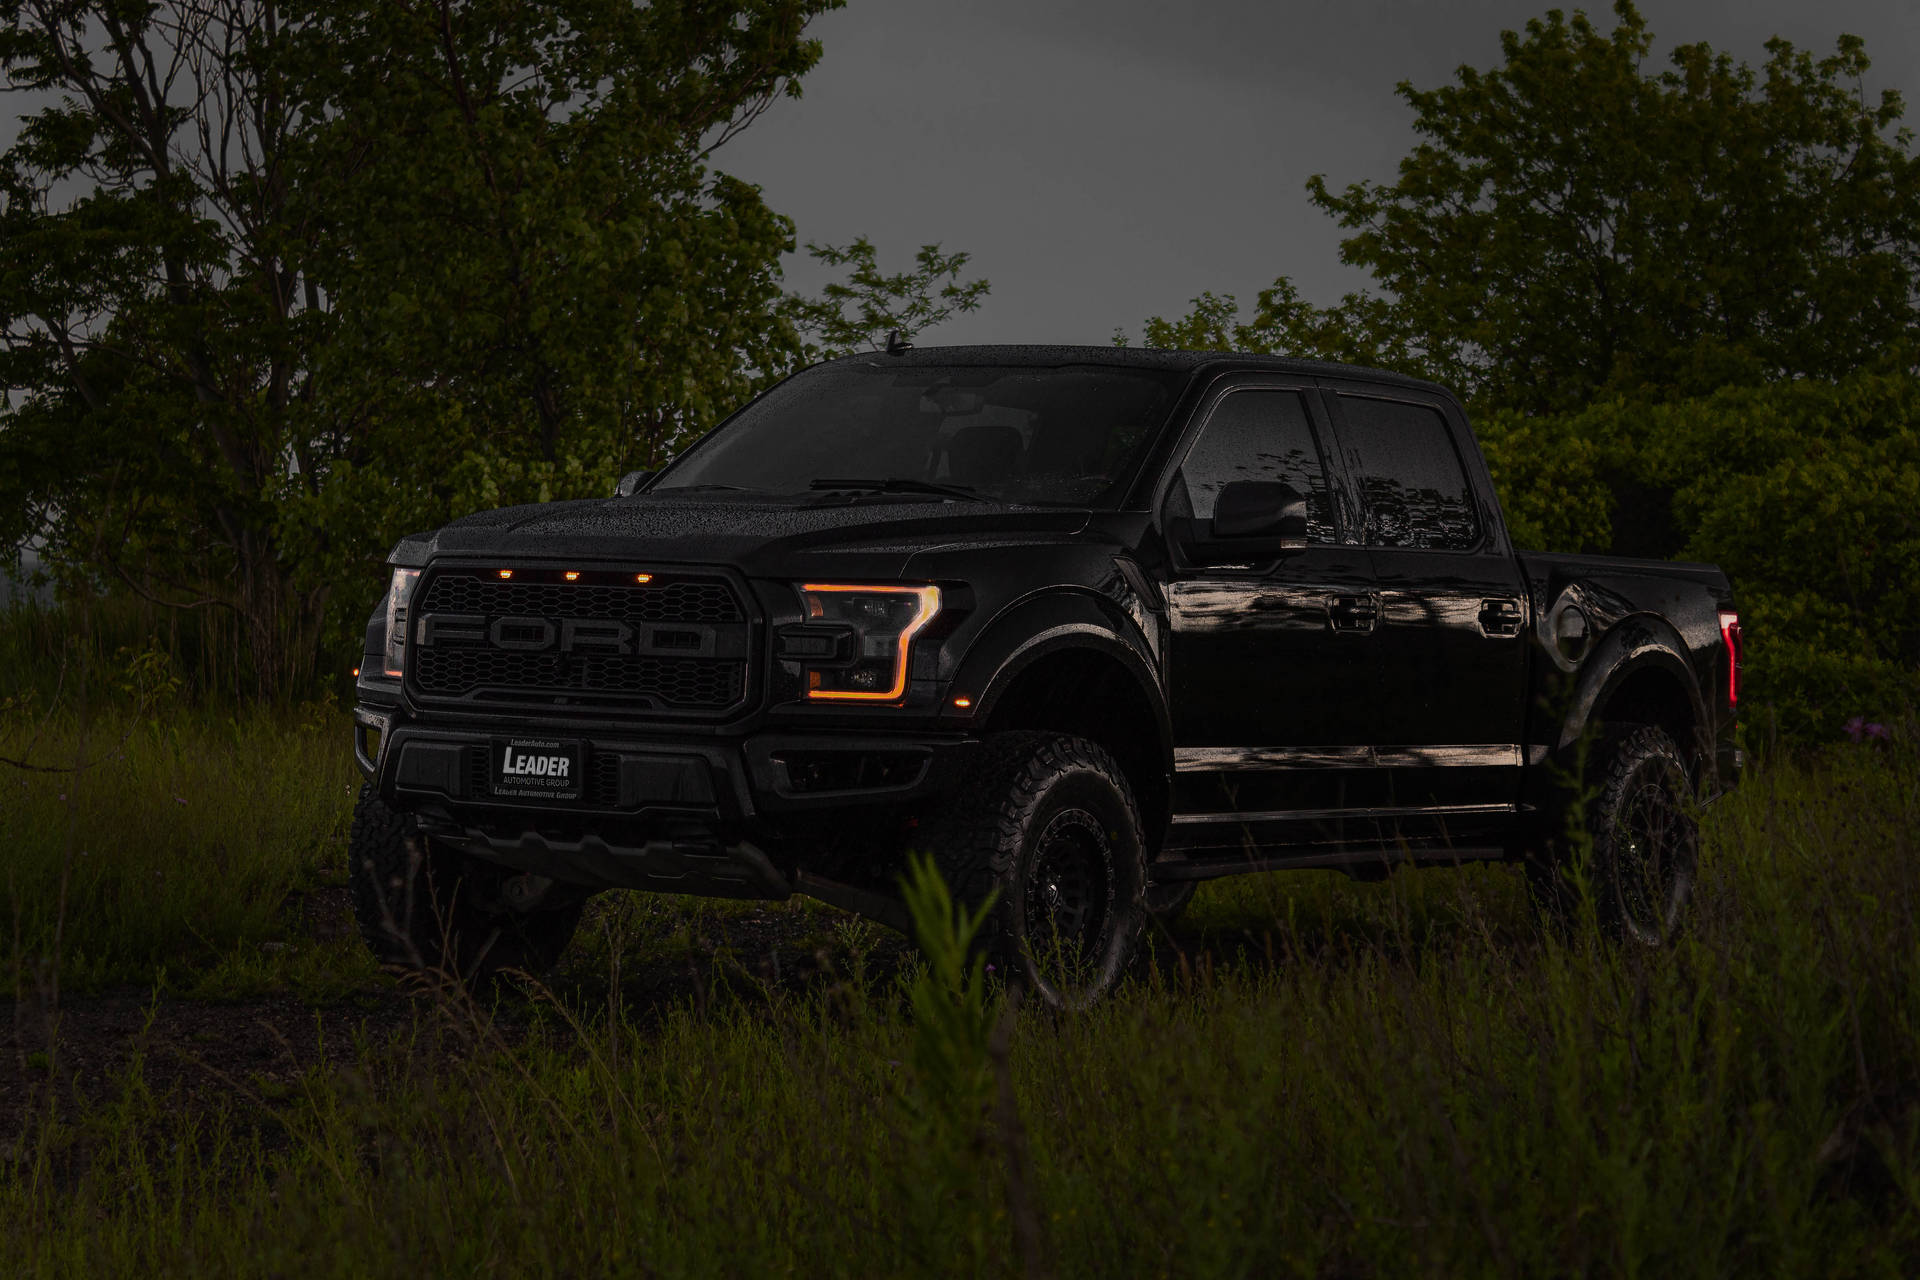 Powerful Ford Raptor With Vibrant Orange Headlights Shining In The Dark Background